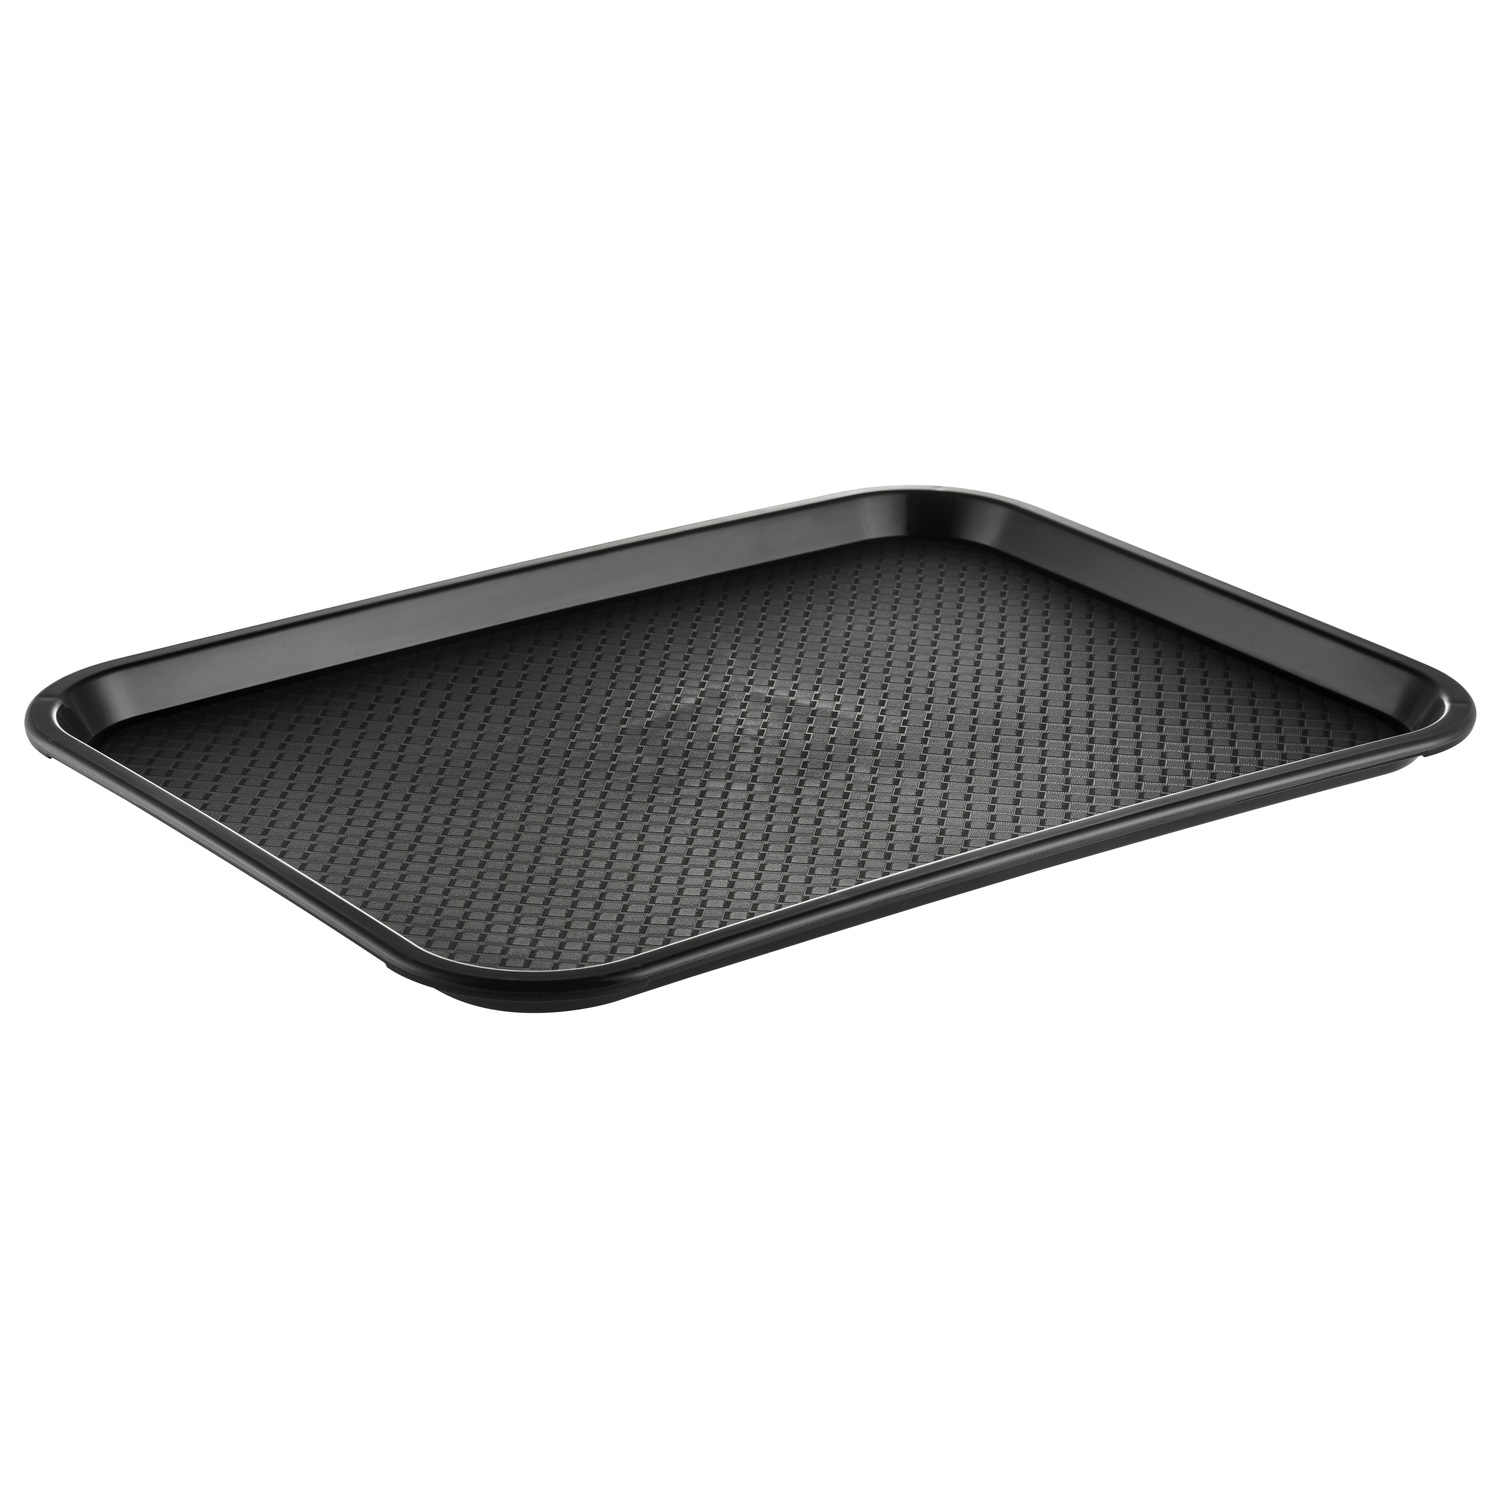 CAC China DSPT-1216K Black Fast Food/Cafeteria Tray, 16" x 12"